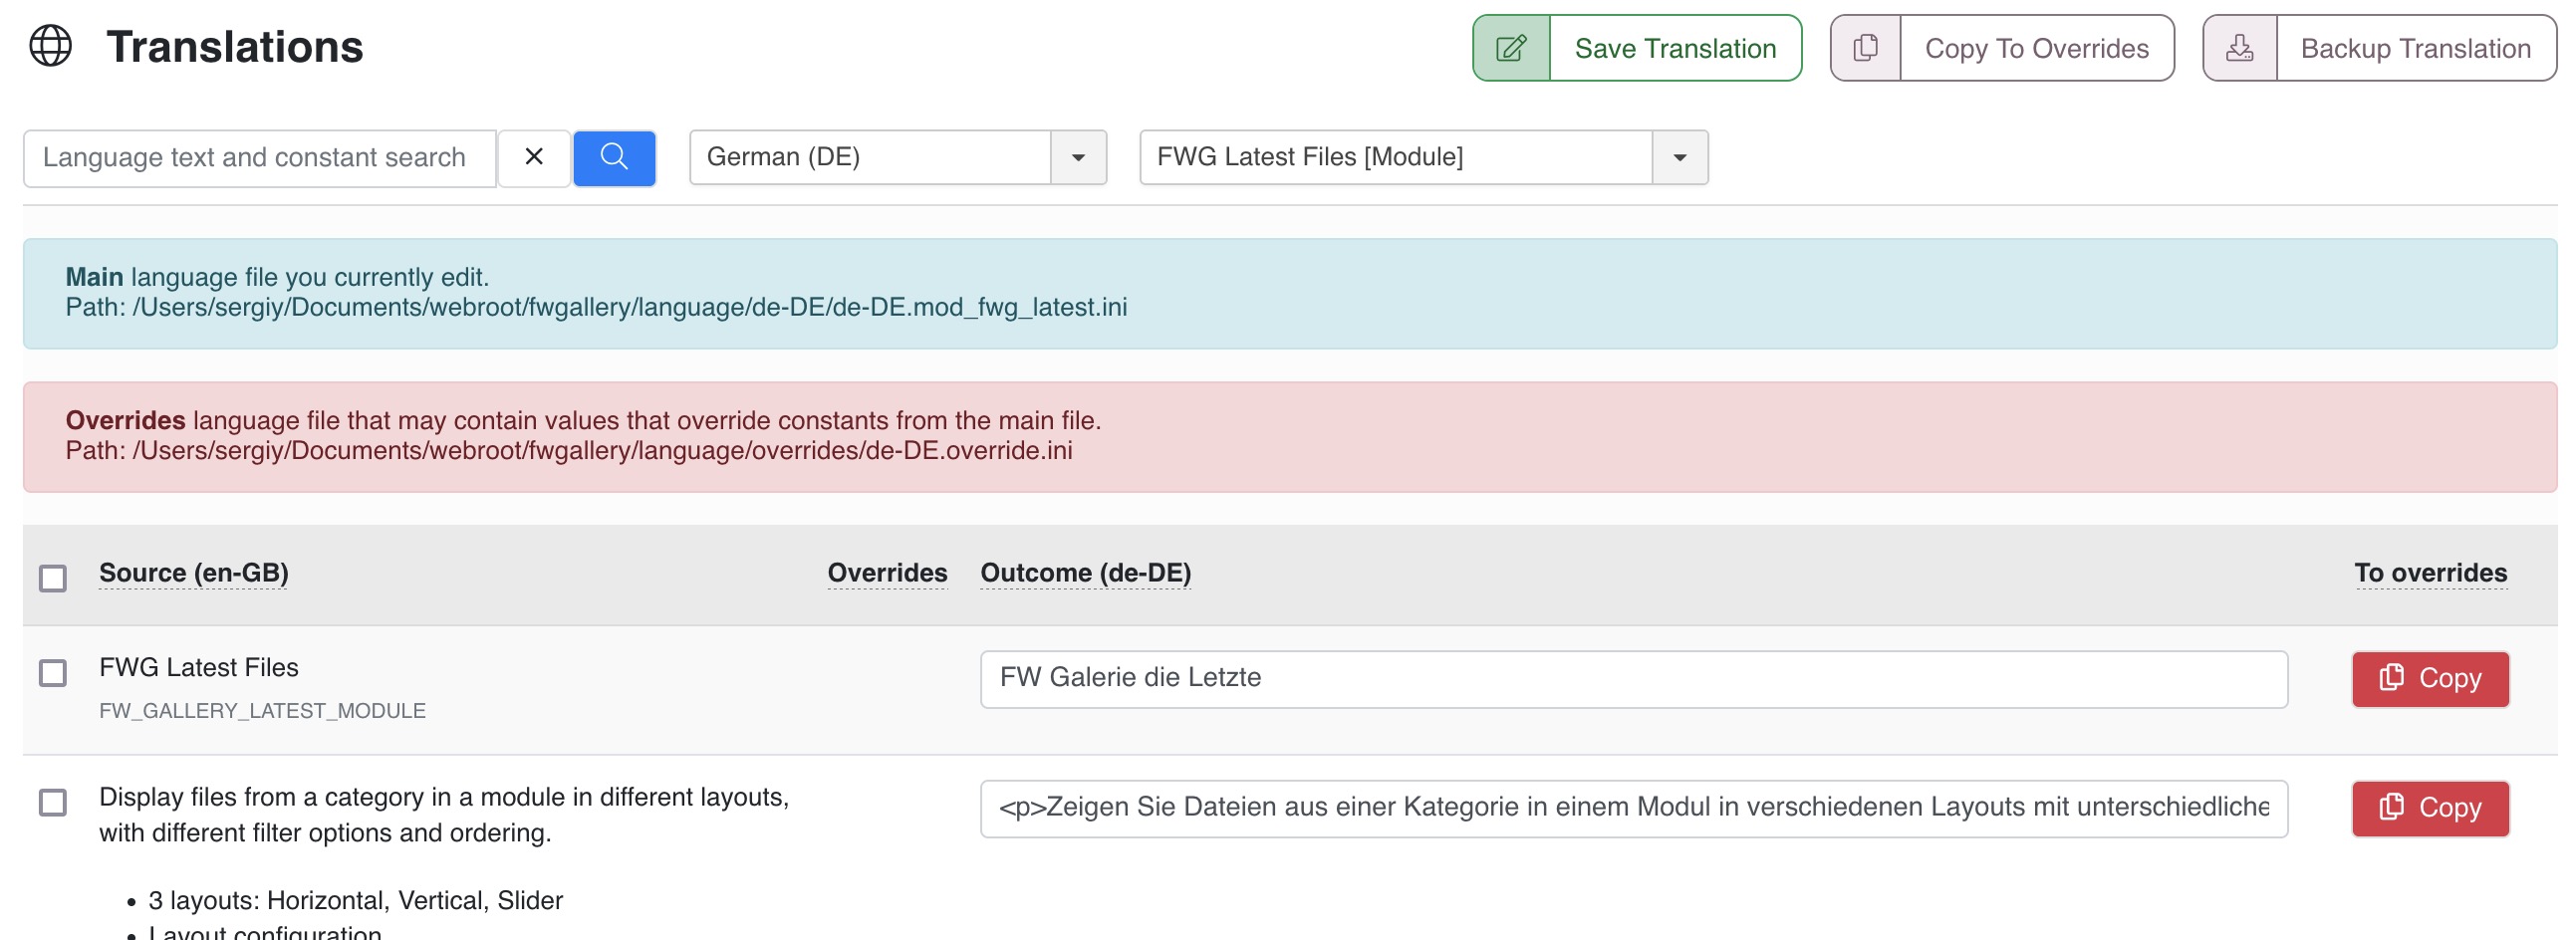 Back-end and front-end interface text translation for active languages. Translation language become available in dropdown if they are activated on the website.